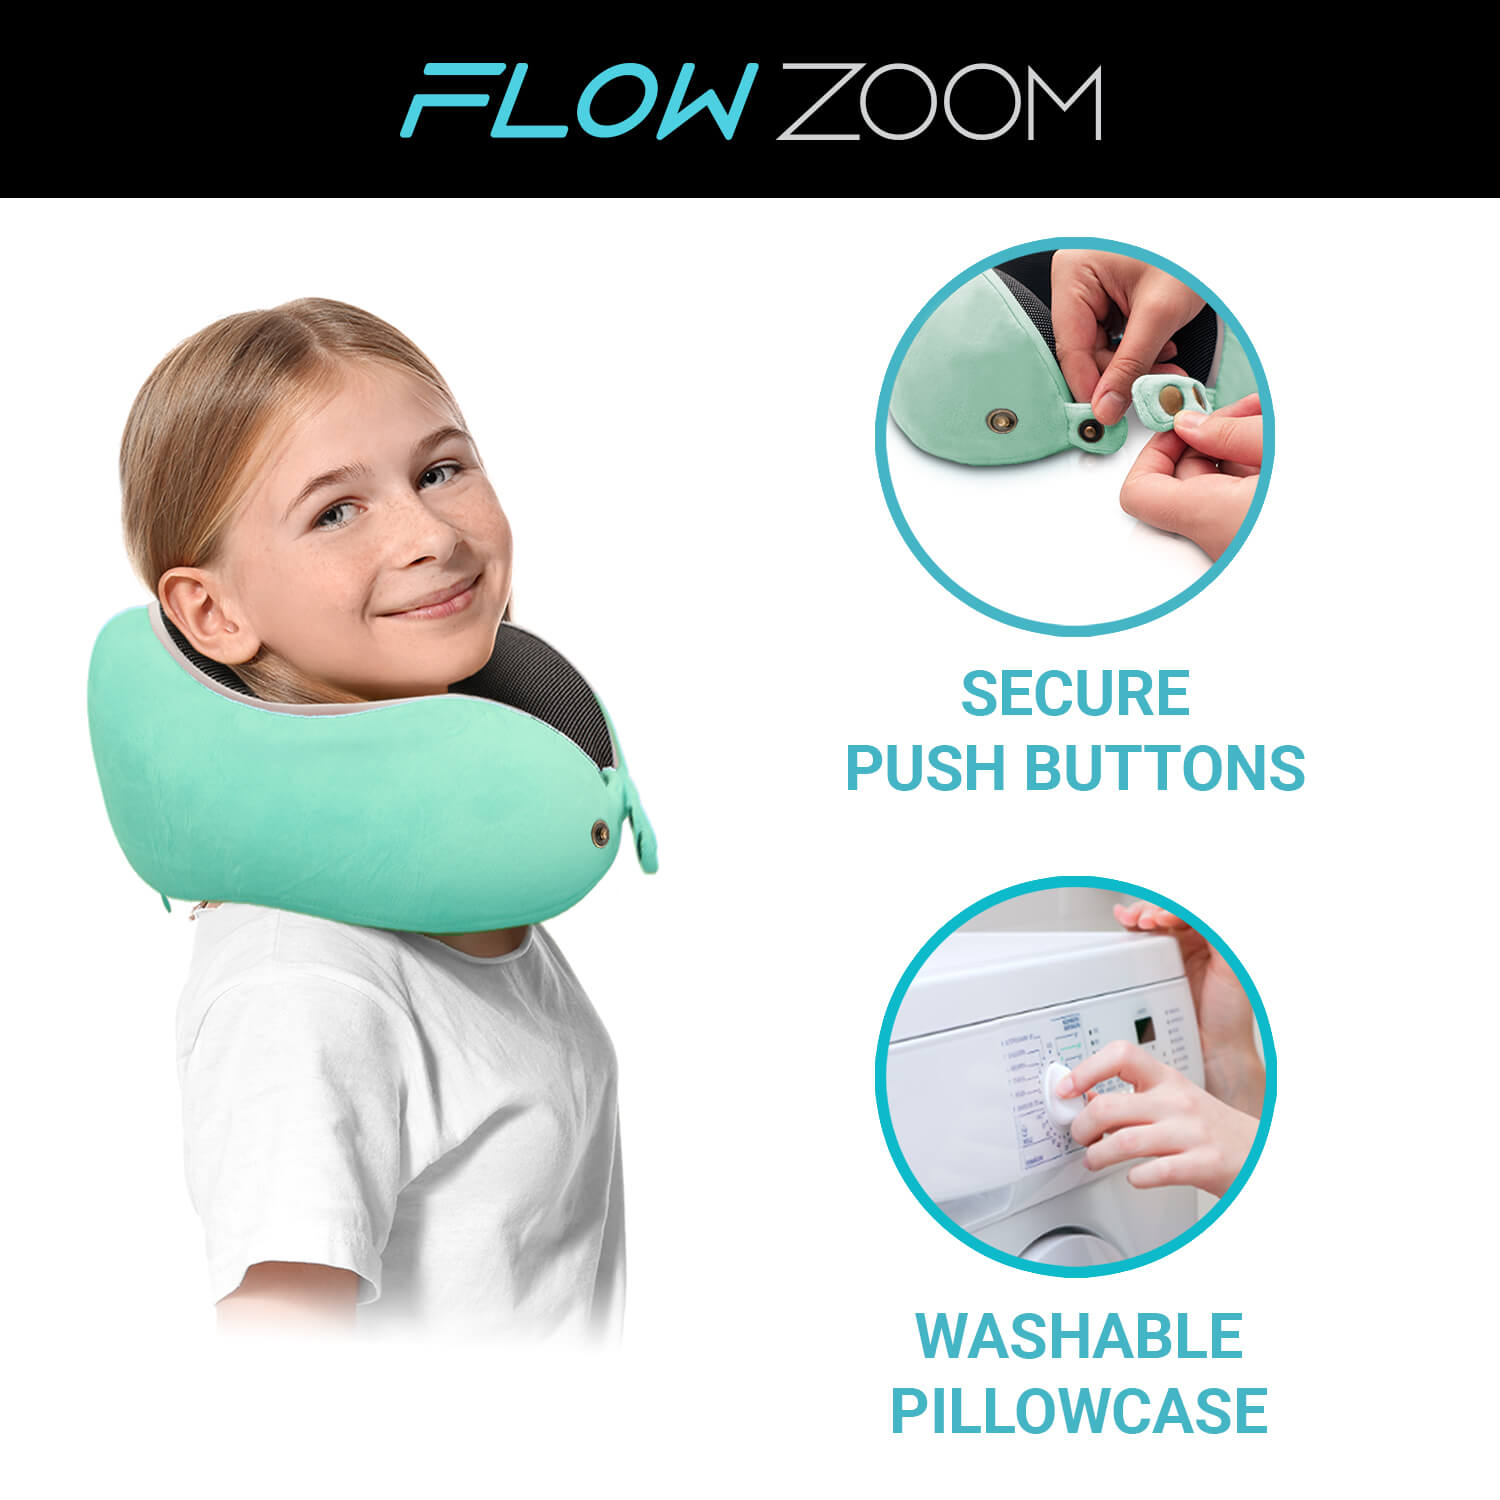 COMFY memory foam kids pillow with secure buttons and washable pillowcase